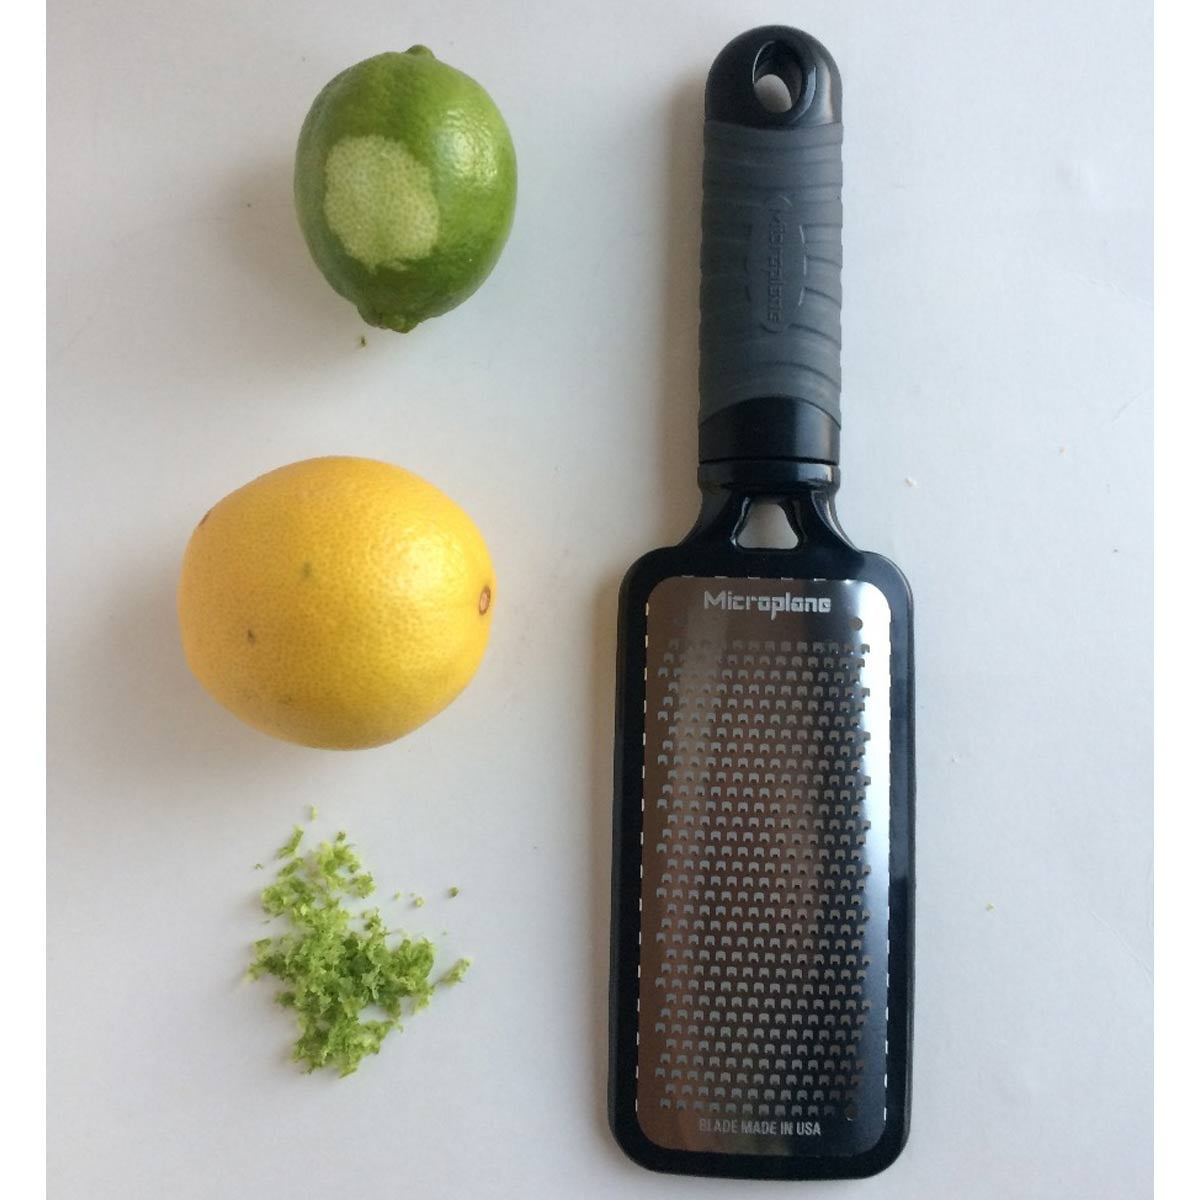 Microplane Home Series Kitchen Graters